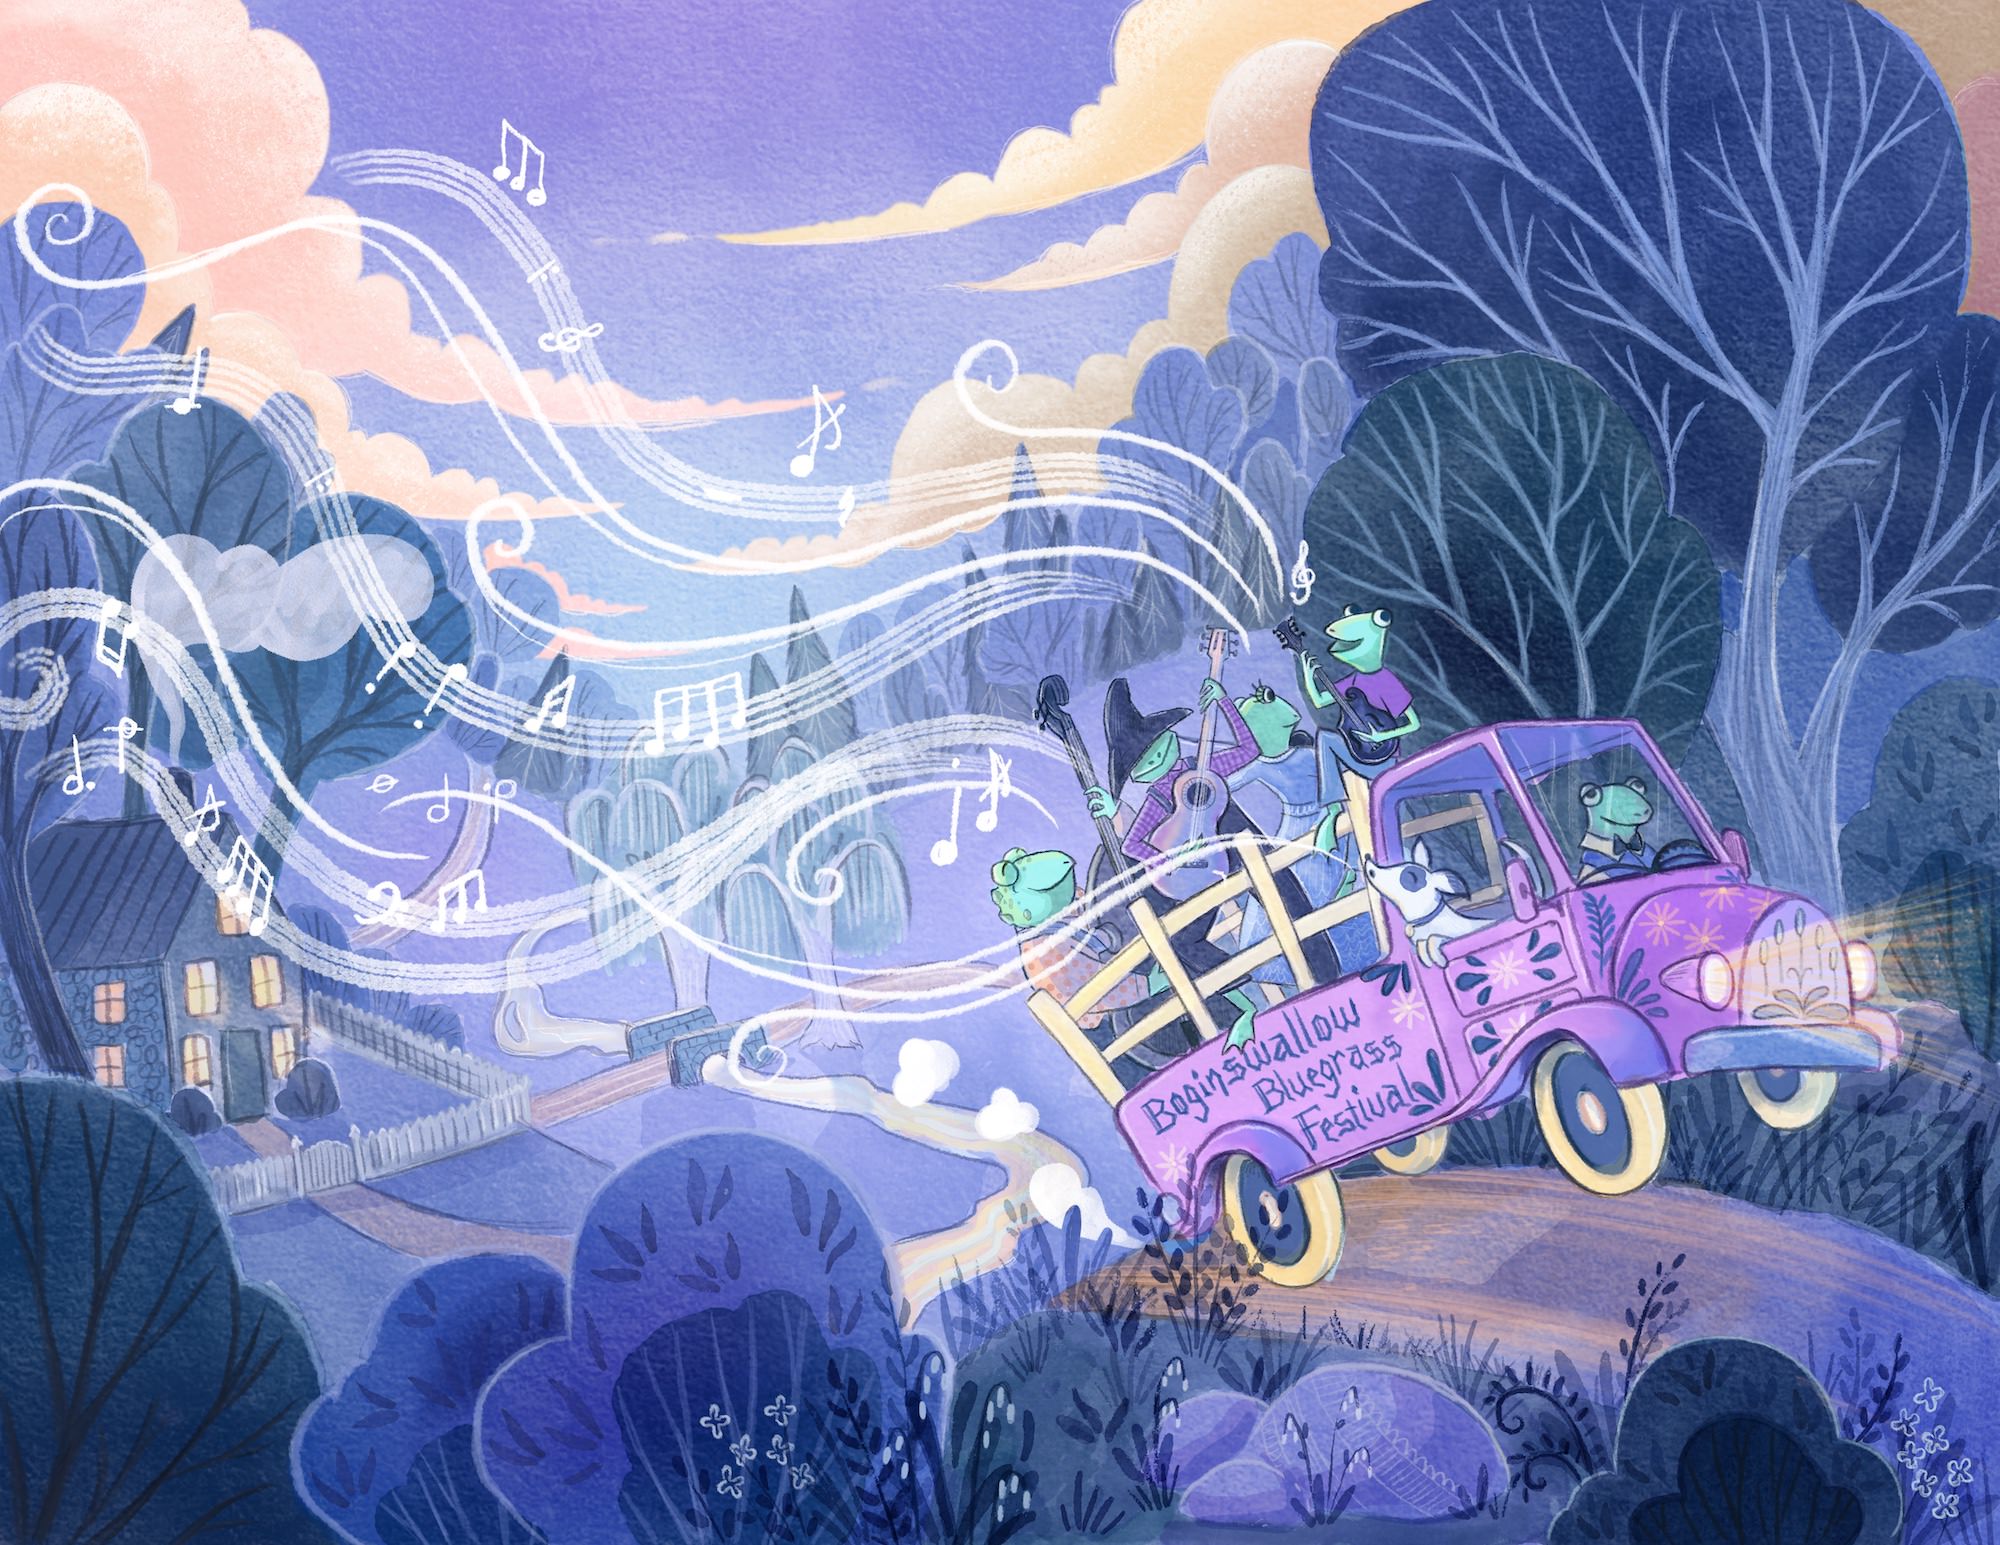 Children's book illustration of an old pickup truck with railings in the bed, driving over the crest of a hill. In the back of the truck are four frogs playing music on stringed instruments. Whimsical music notes and lines stream away behind them. In the distance behind the truck is a valley with a river flowing through it and a house with lighted windows. A sunset sky with orange and yellow clouds.